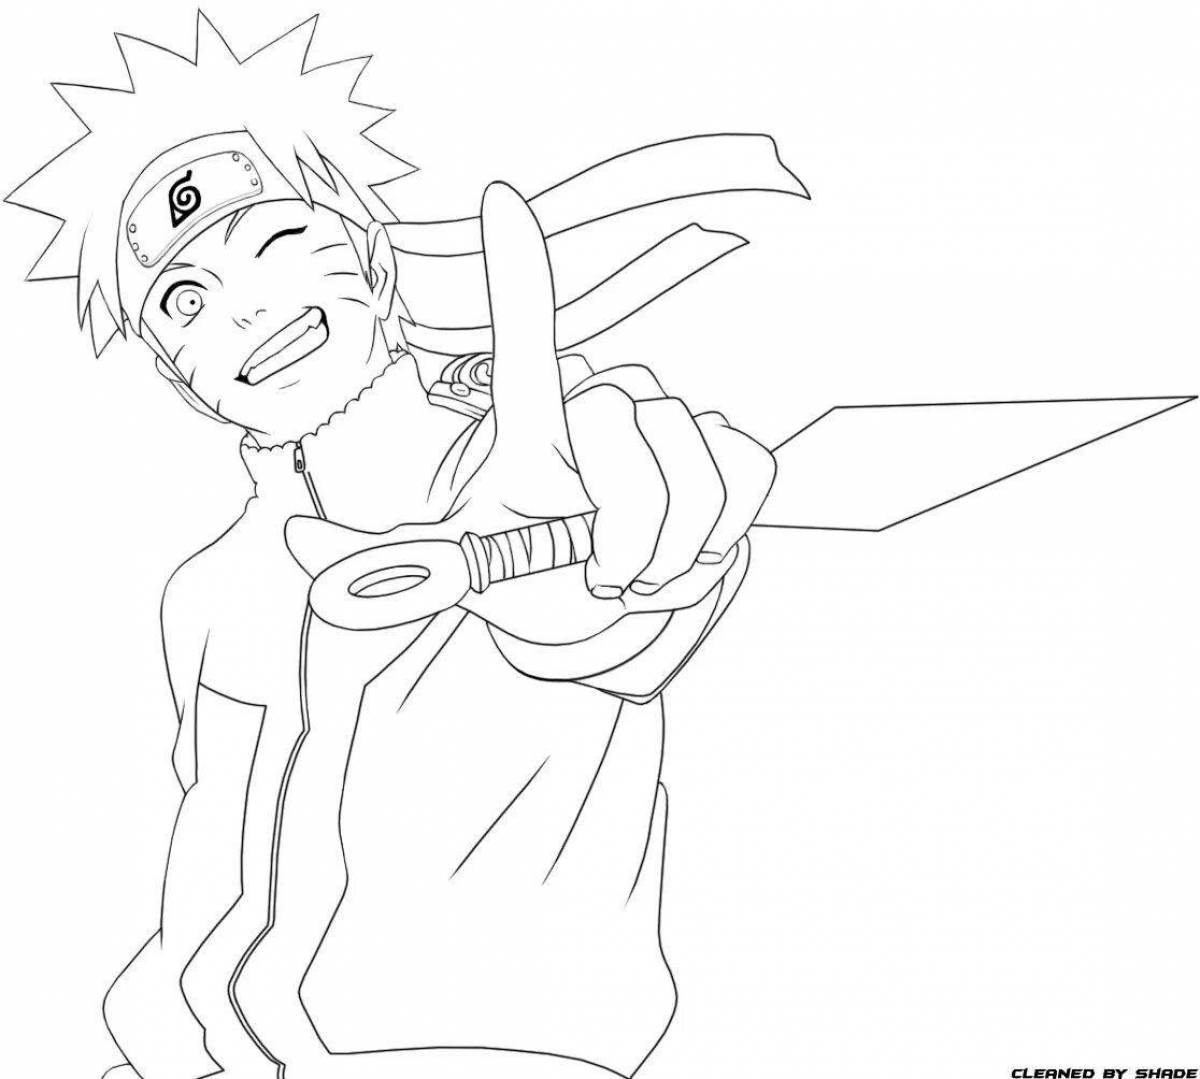 Charming kunai from standoff 2 coloring page